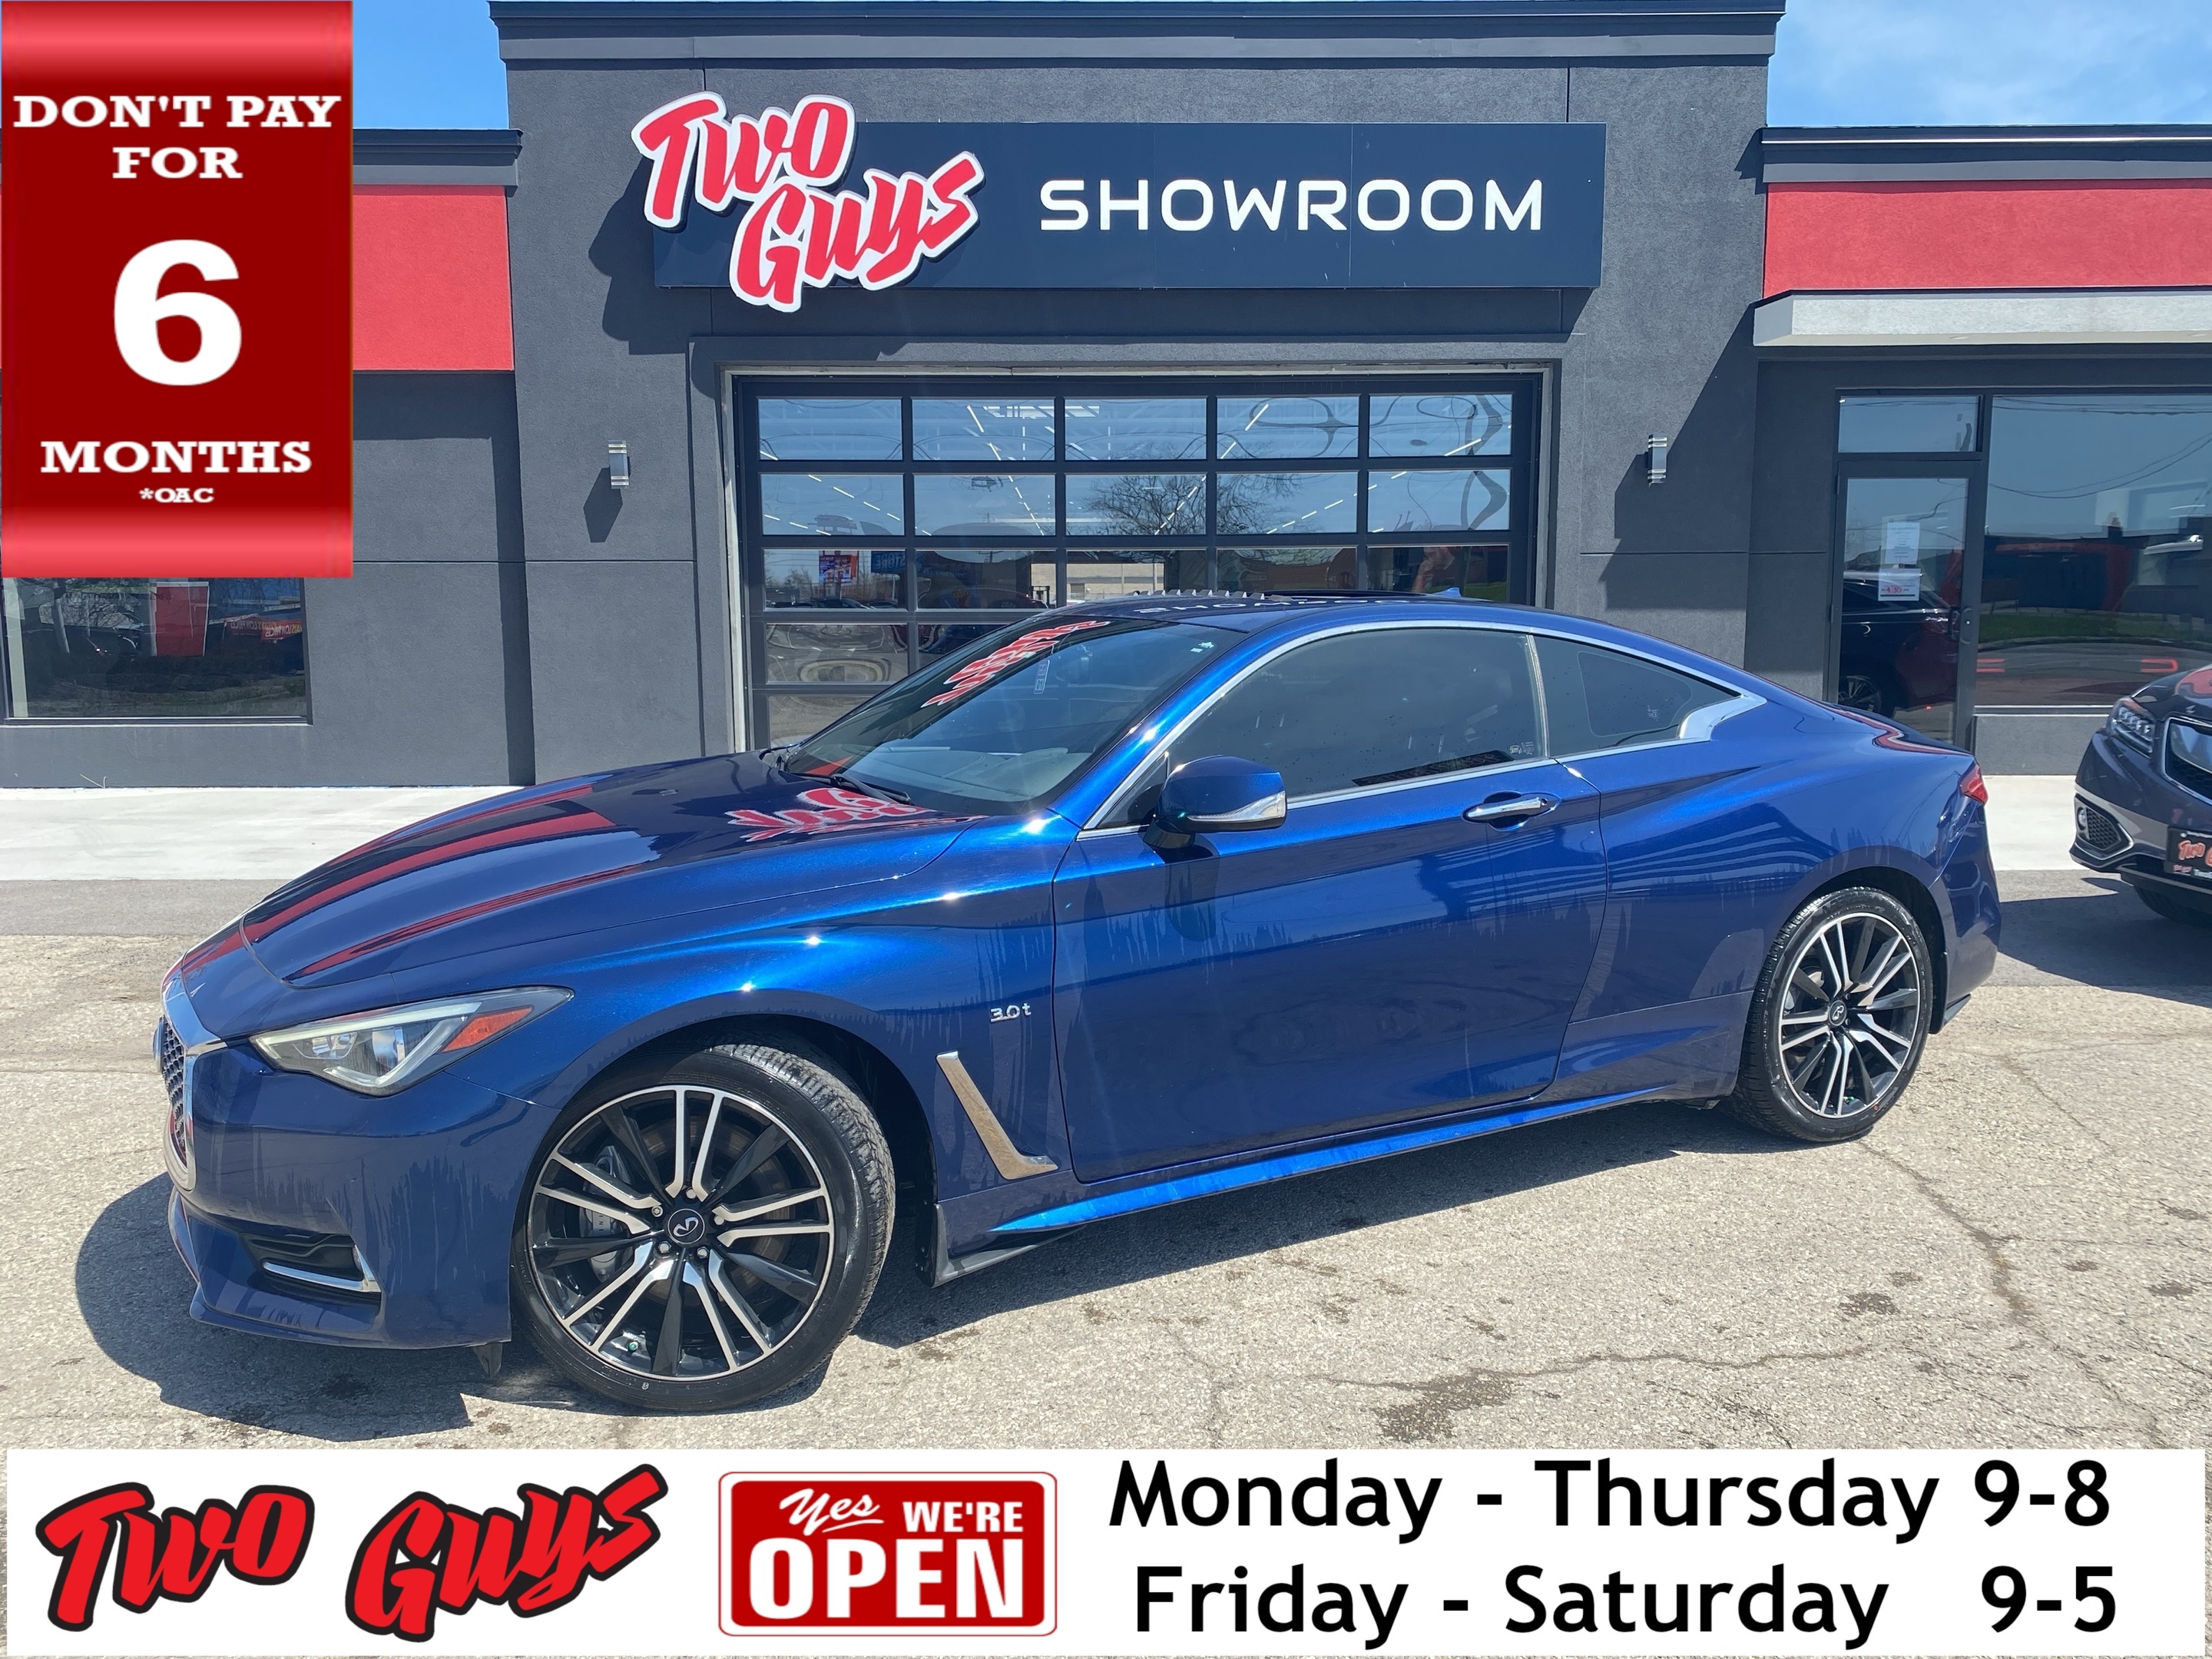 2018 Infiniti Q60 3.0t LUXE AWD Leather Nav Sunroof Back Up Camera